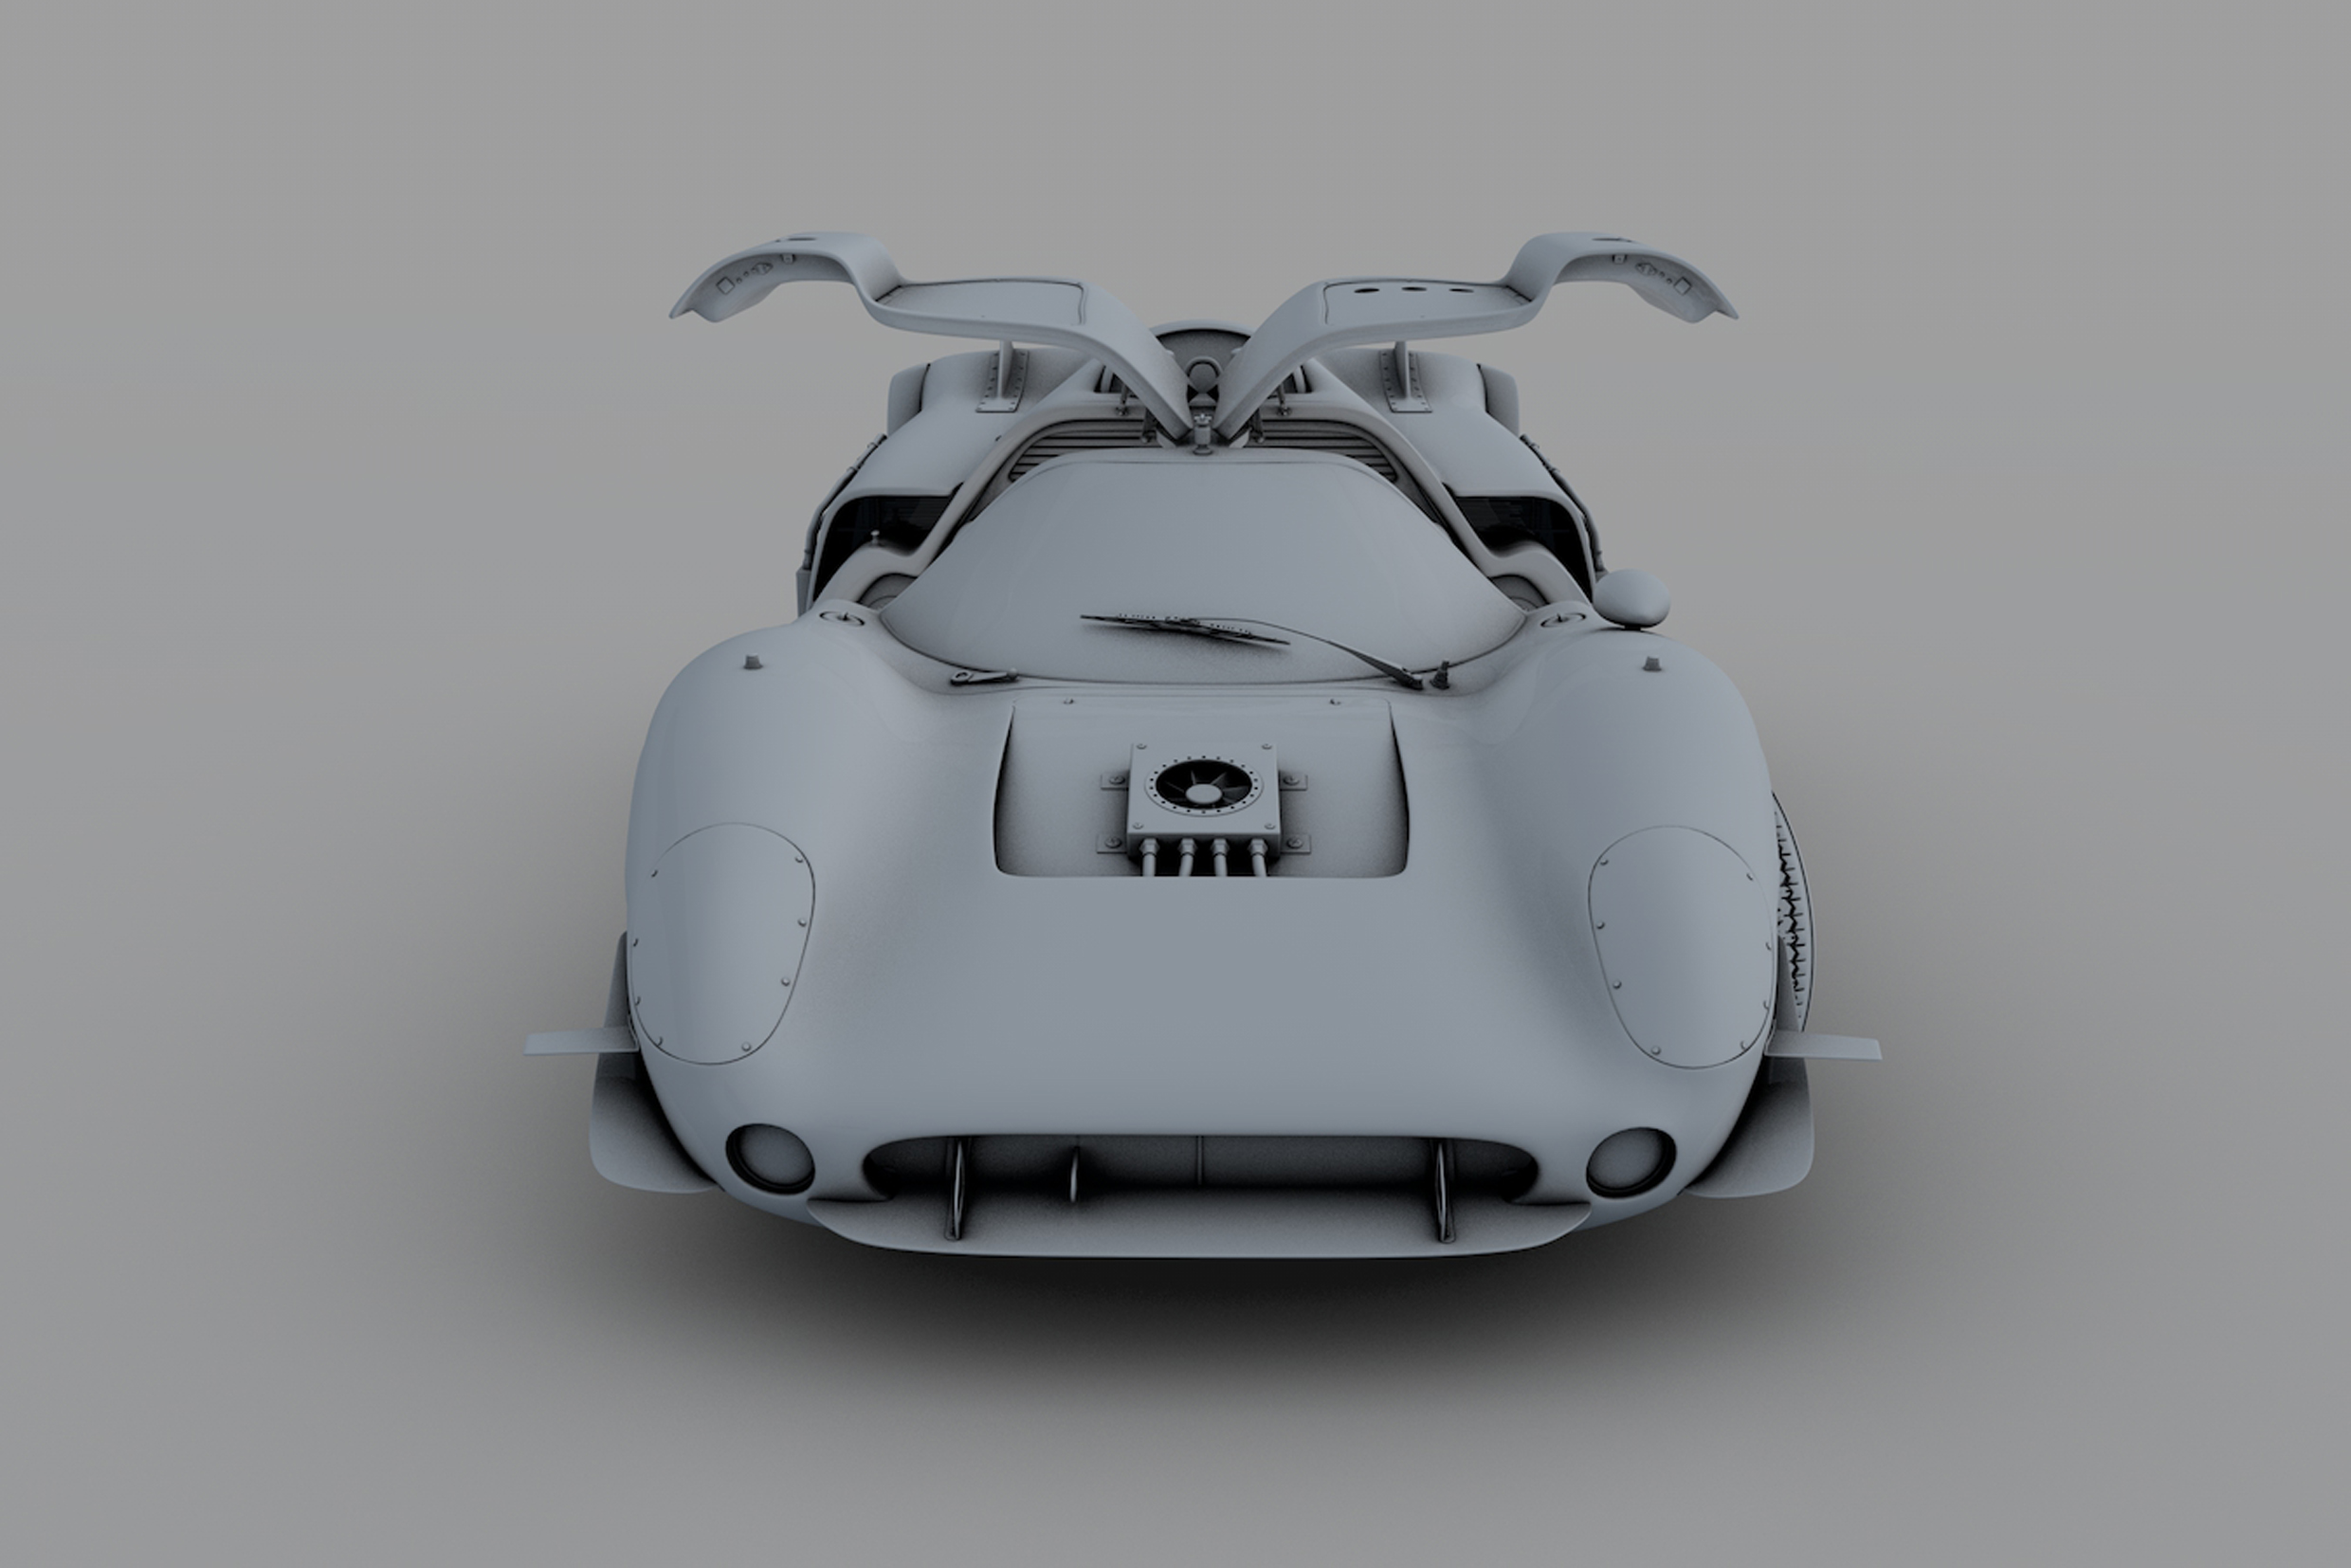 Modelling process of the car